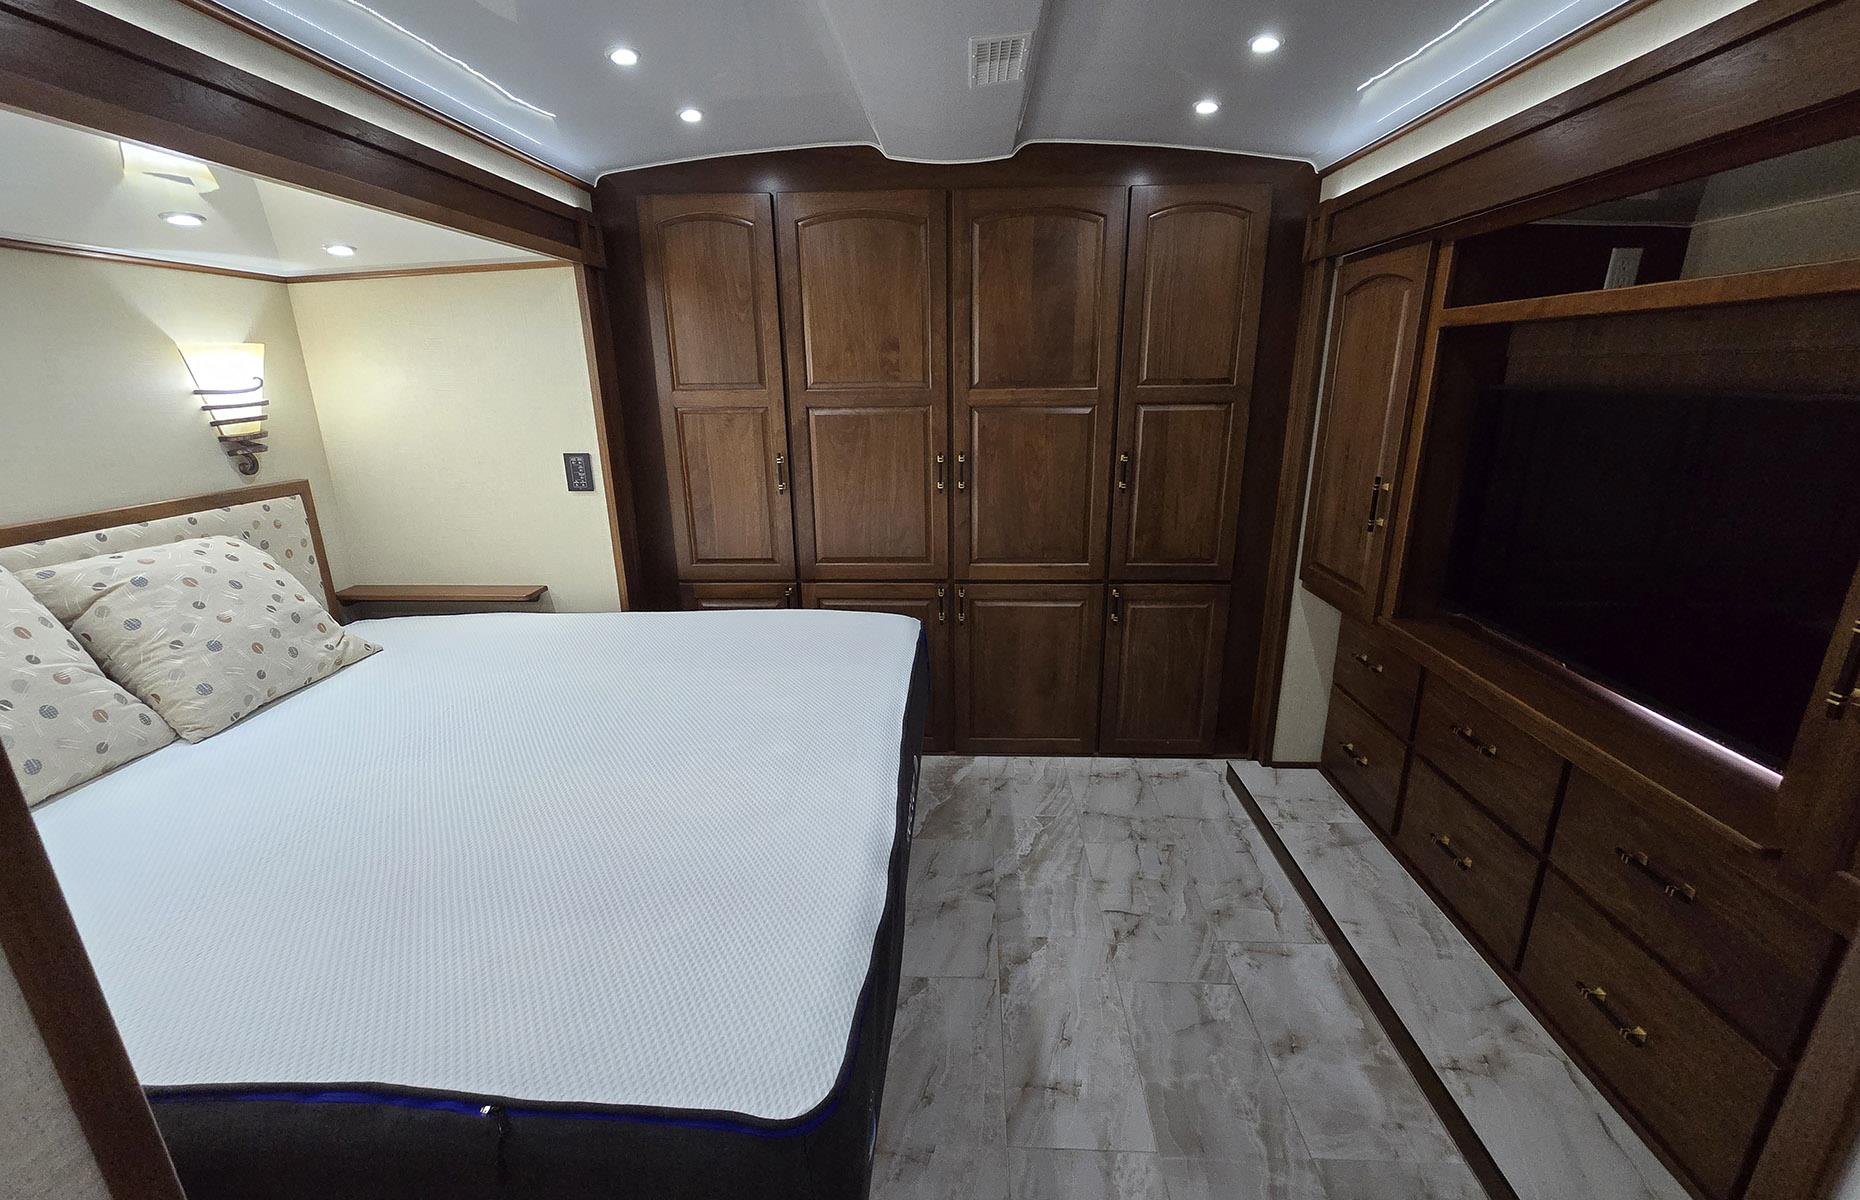 <p>Clients can choose to have up to three king-size bedrooms in their bespoke trailer, which can also feature expansive entertaining areas, multiple bathrooms, and an array of other luxe amenities. Price-wise, SpaceCraft's semi platforms cost $8,000 to $9,000 per linear foot.</p>  <p>This 57-foot trailer costs around $500,000 but they can easily go beyond a million dollars given the almost limitless customization choices.</p>